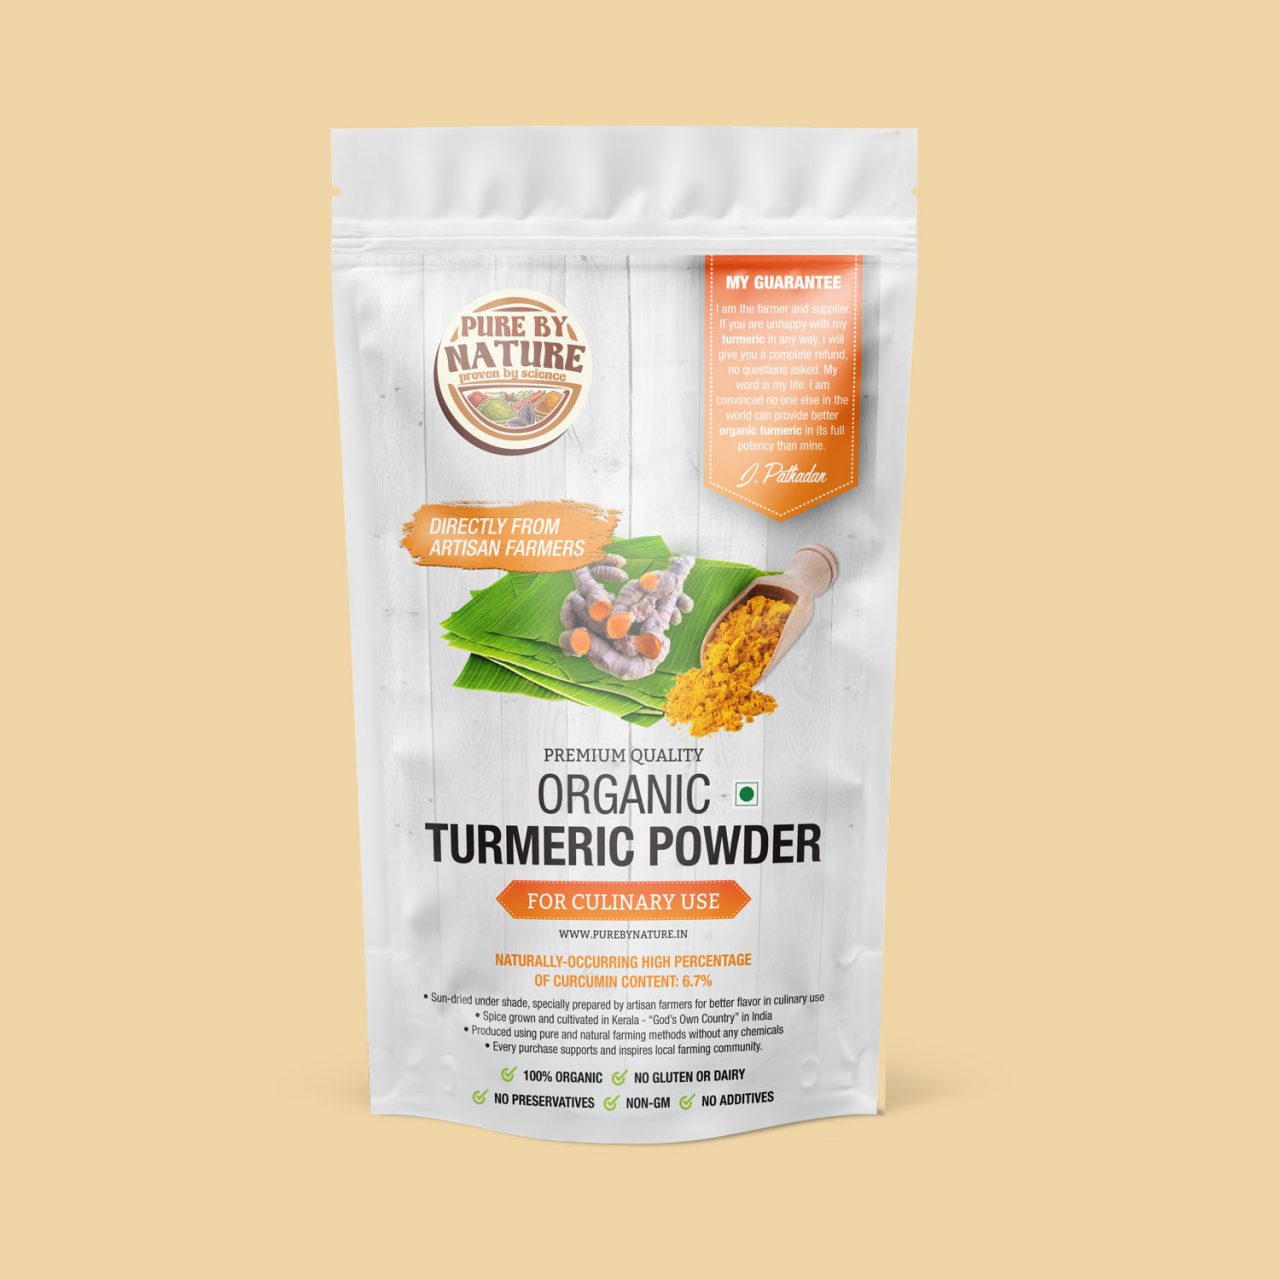 Product Label Design on Pouch Bag for Organic Turmeric Powder